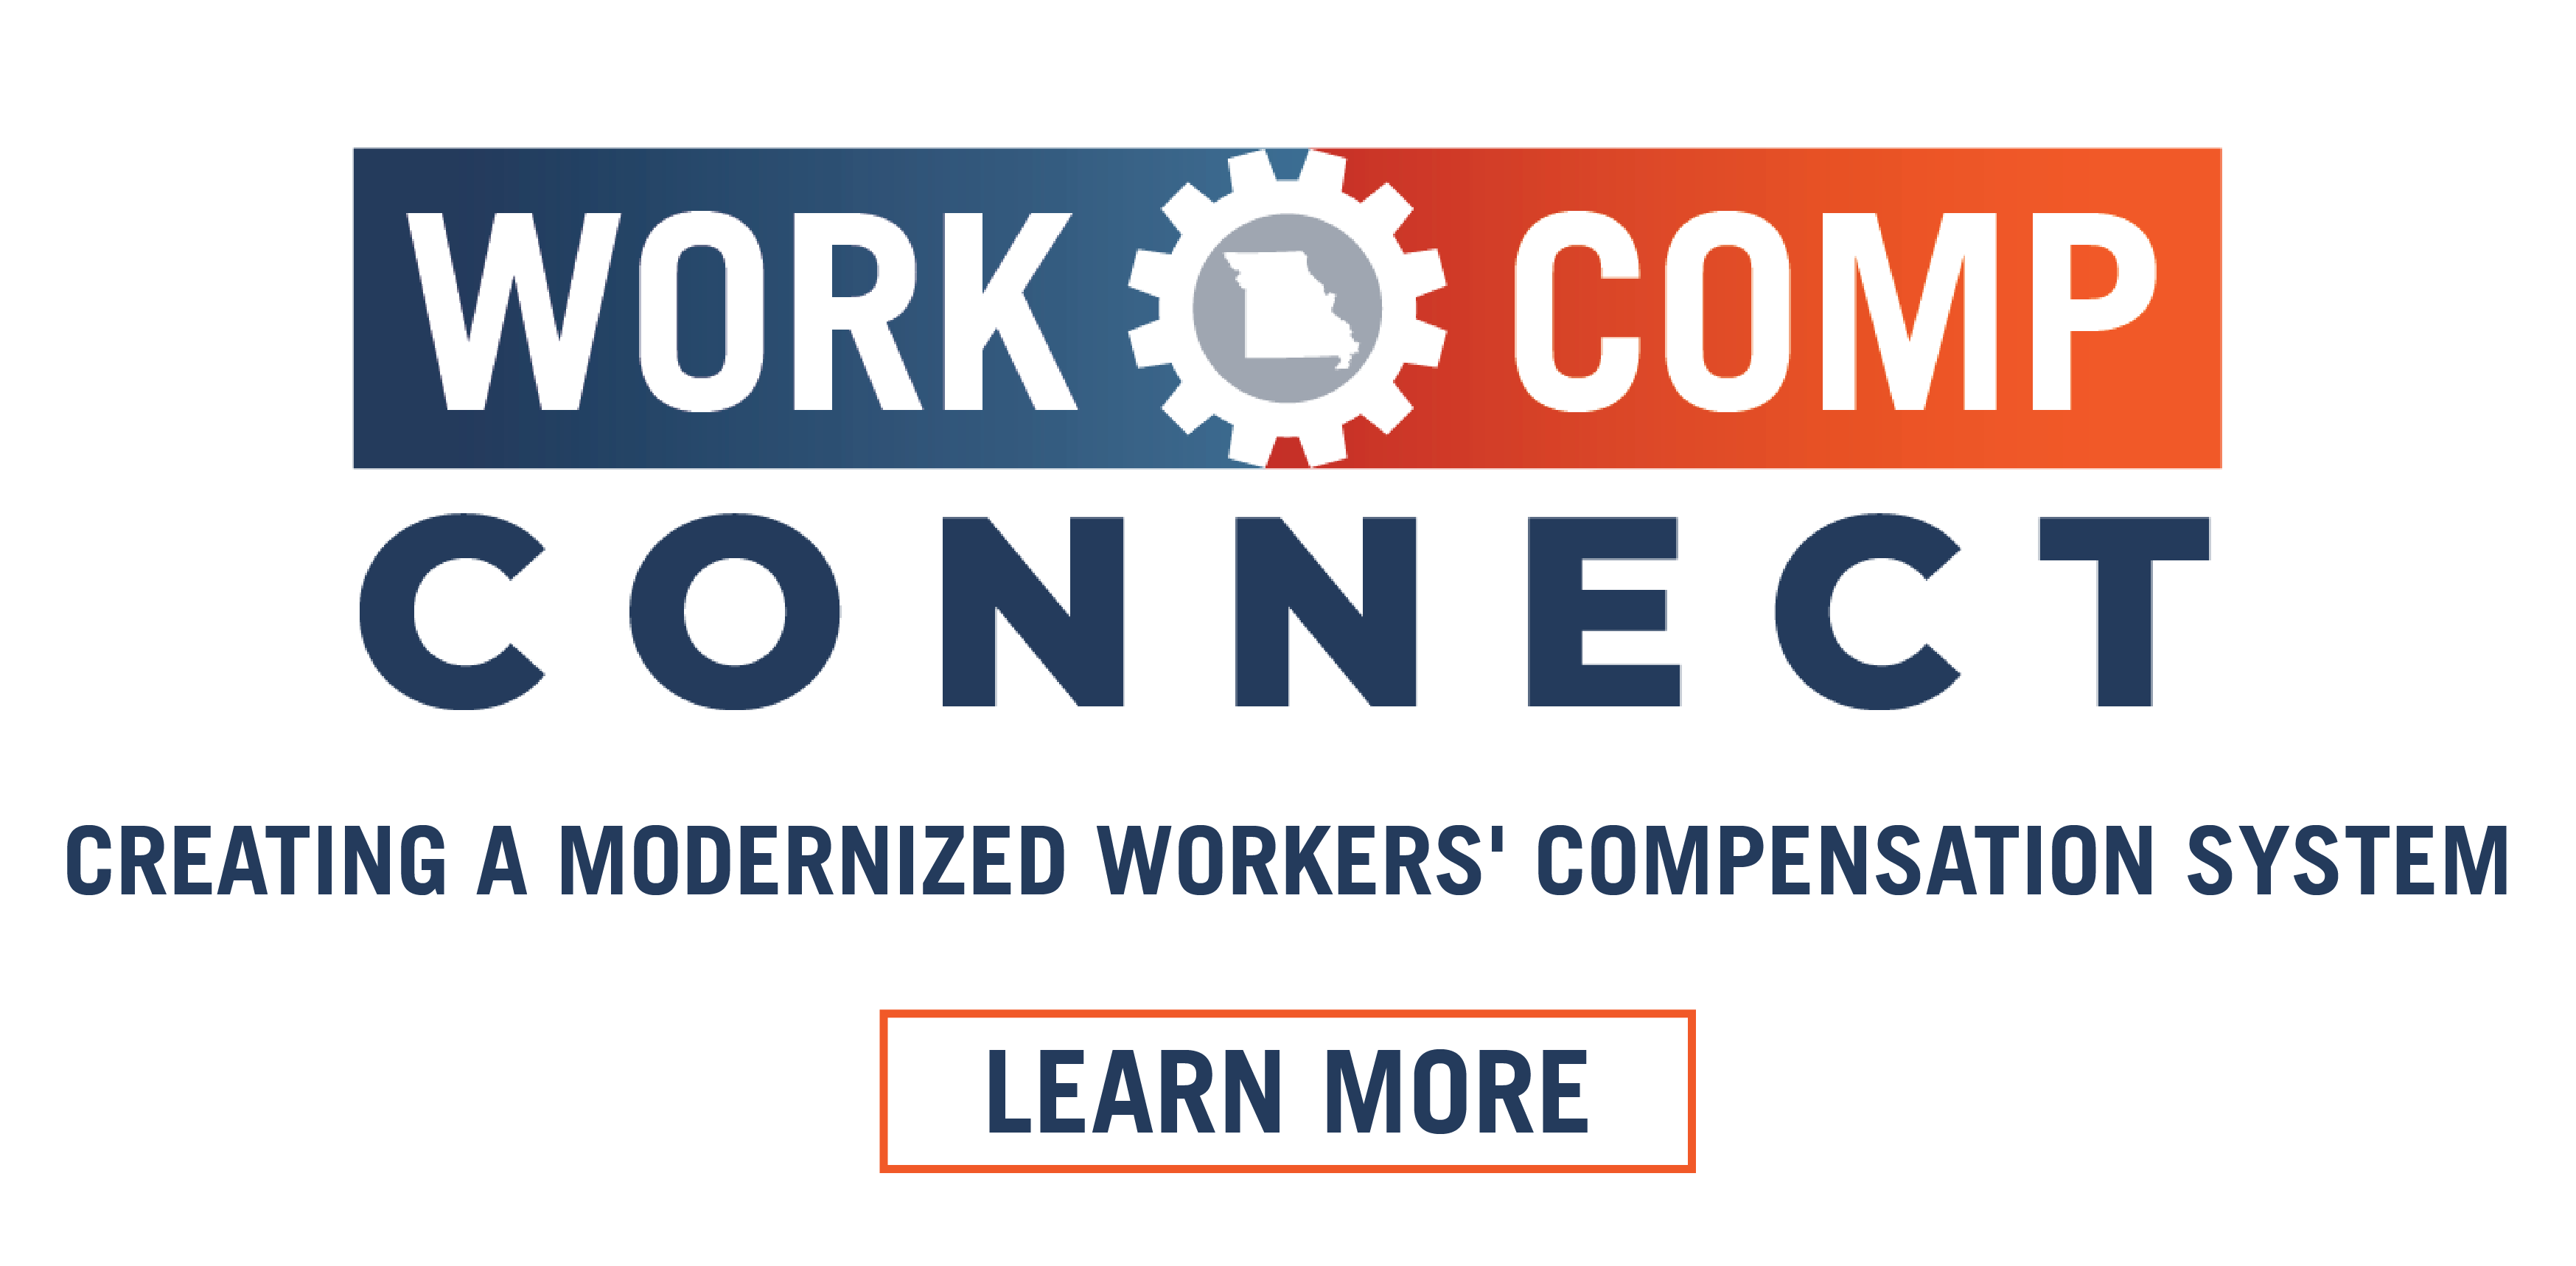 Work Comp Connect - Creating a Modernized Workers' Compensation Program